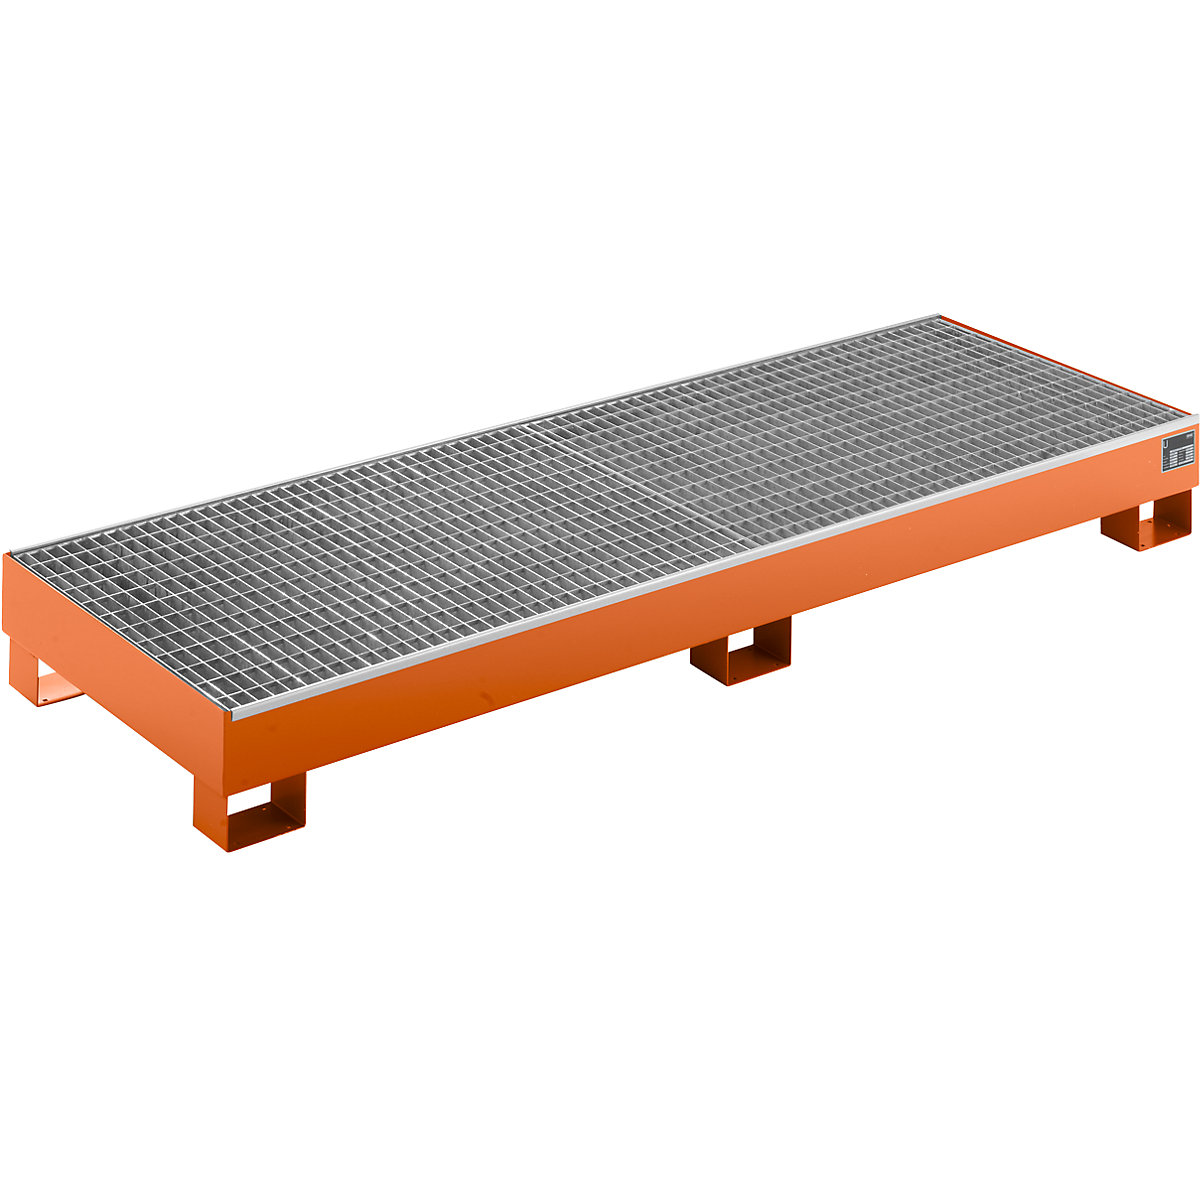 EUROKRAFTbasic – Sump tray made from sheet steel, LxWxH 2400 x 800 x 250 mm, orange RAL 2000, with grate